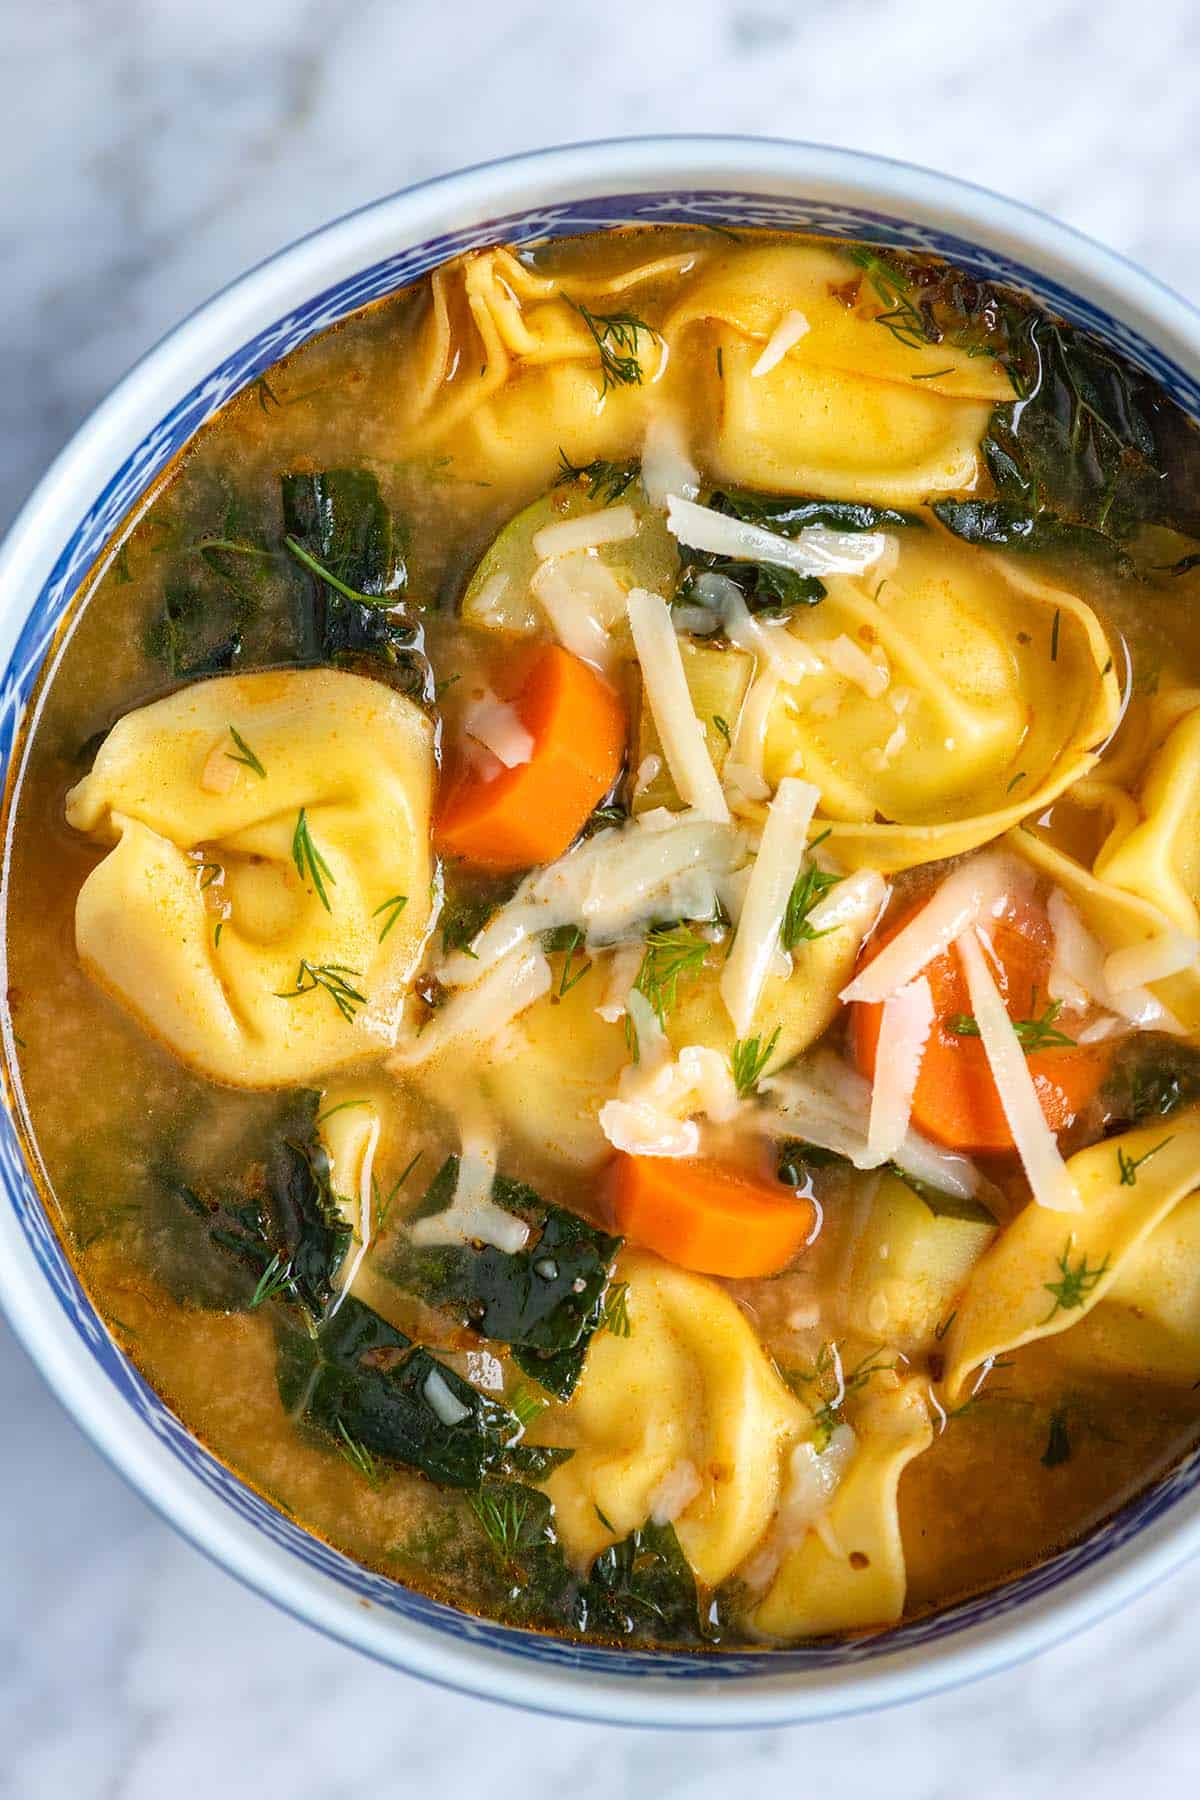 A bowl of tortellini soup with kale, carrots, and parmesan cheese